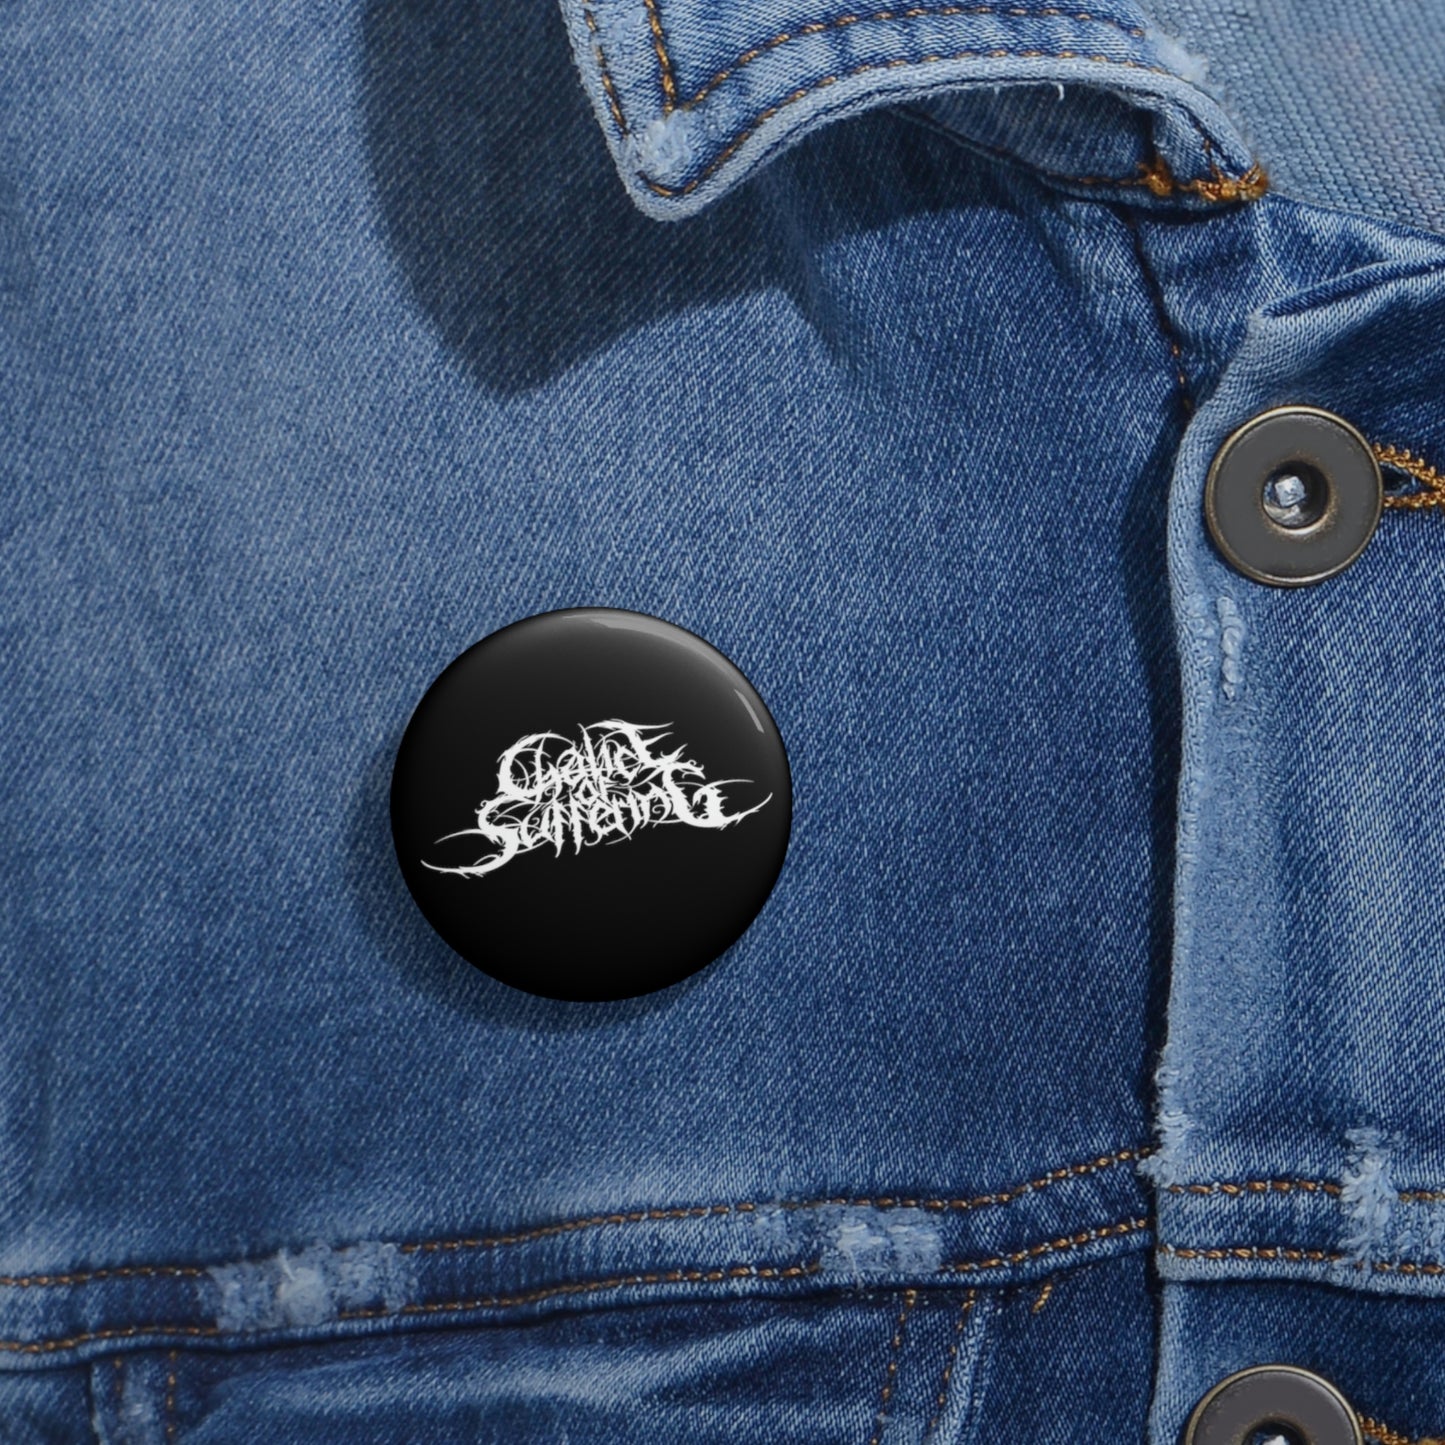 Chalice of Suffering - Button